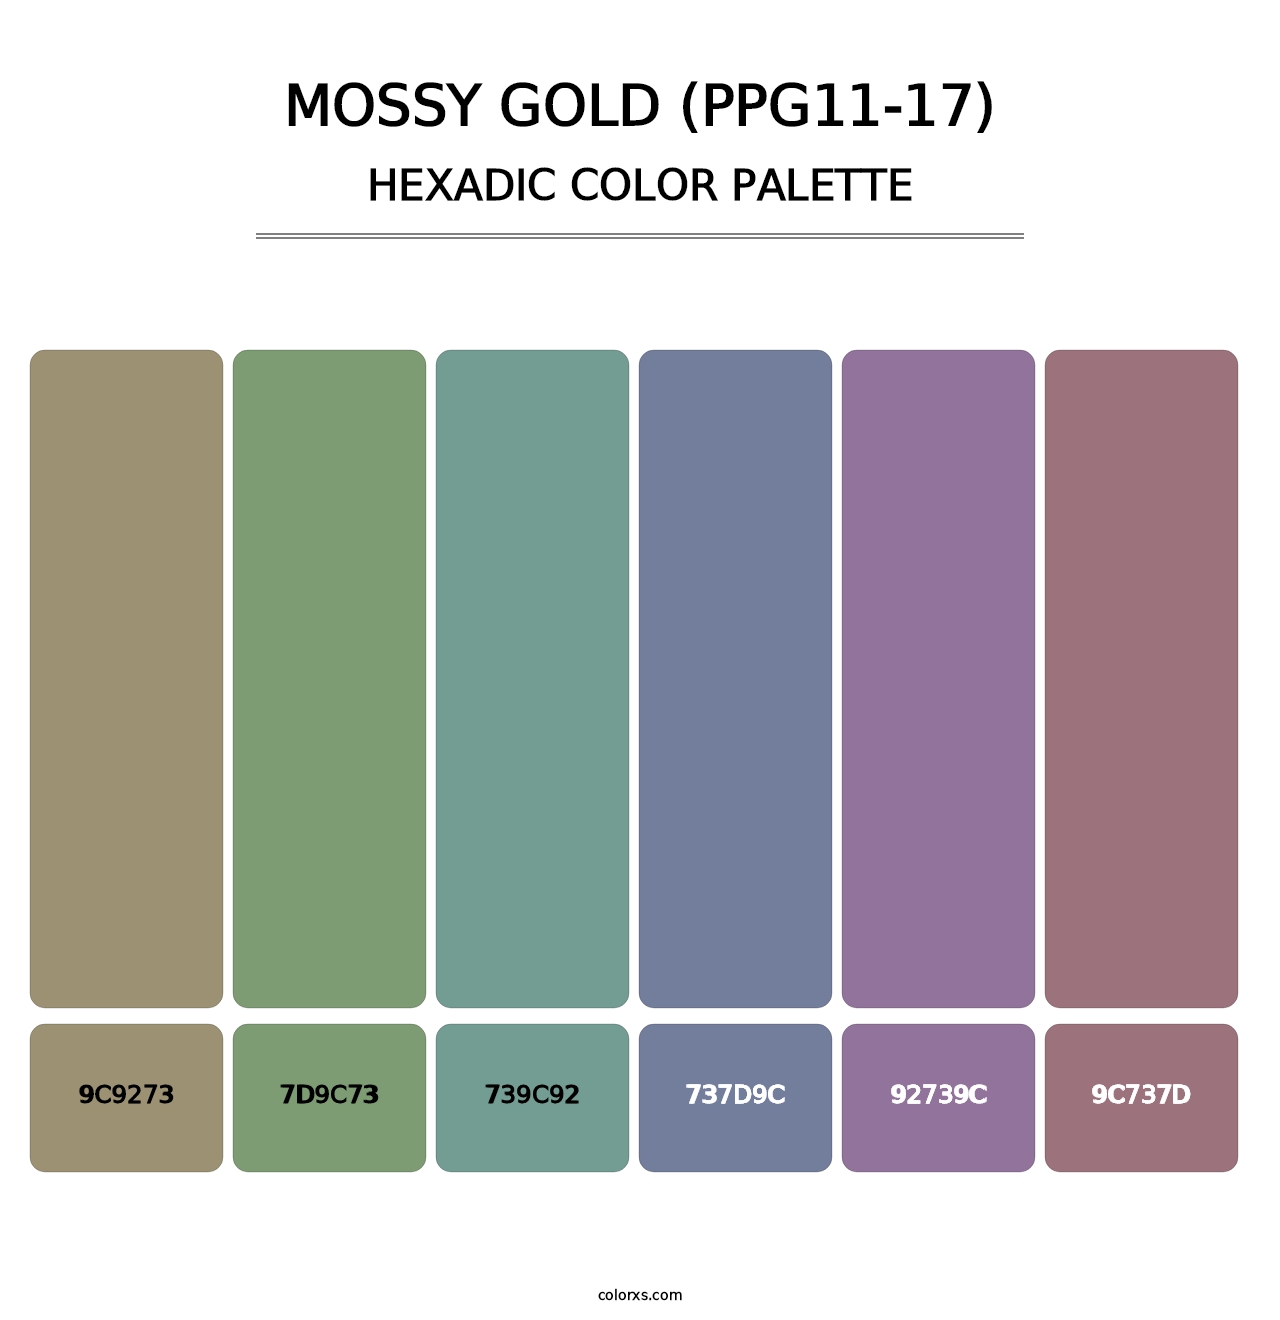 Mossy Gold (PPG11-17) - Hexadic Color Palette